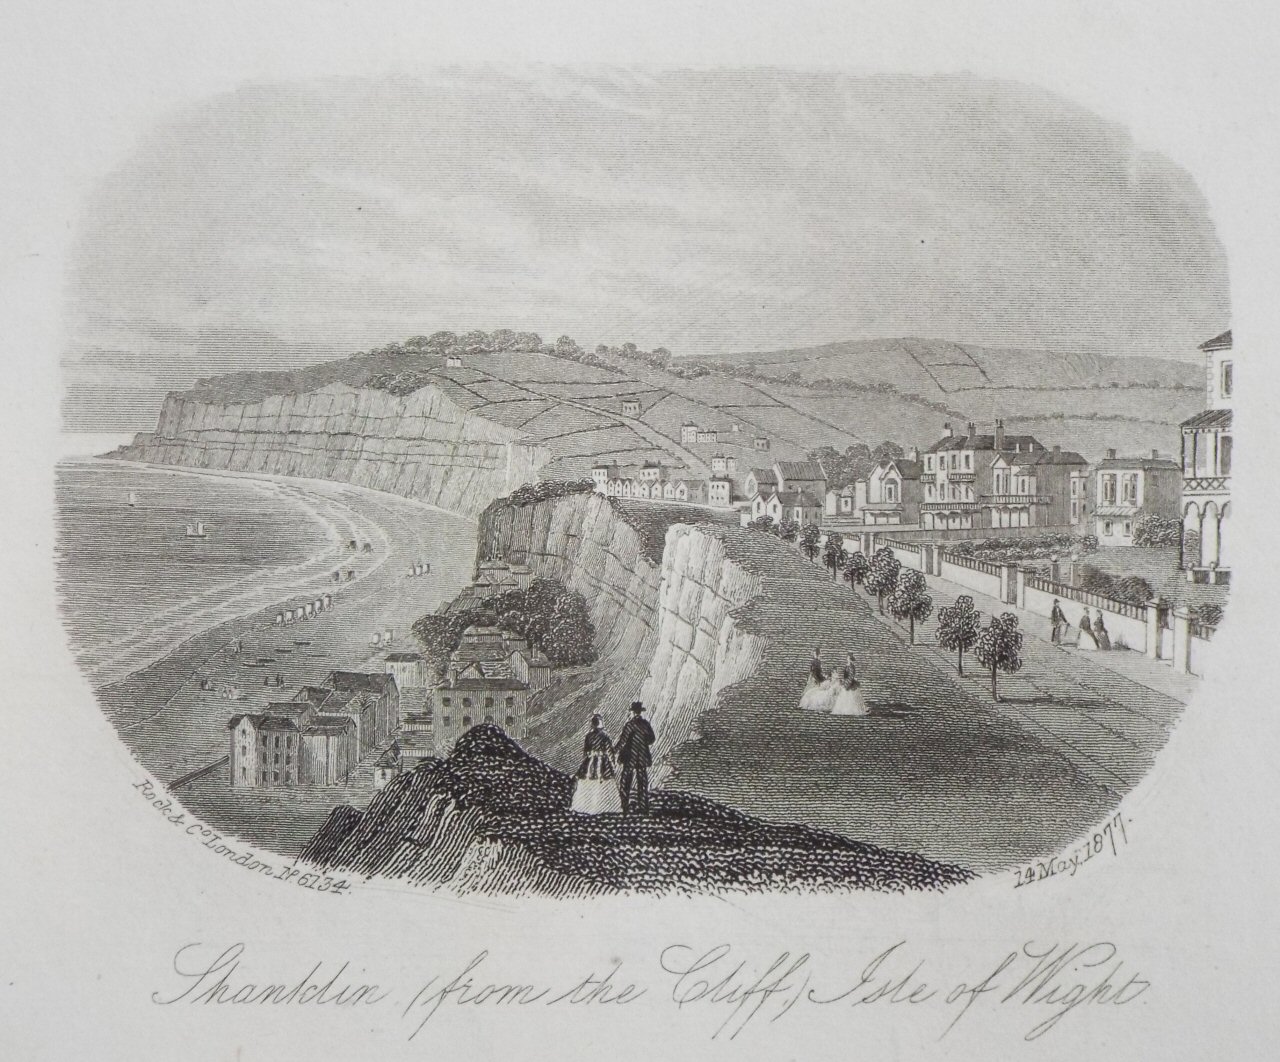 Steel Vignette - Shanklin (from the Cliff') Isle of Wight. - Rock